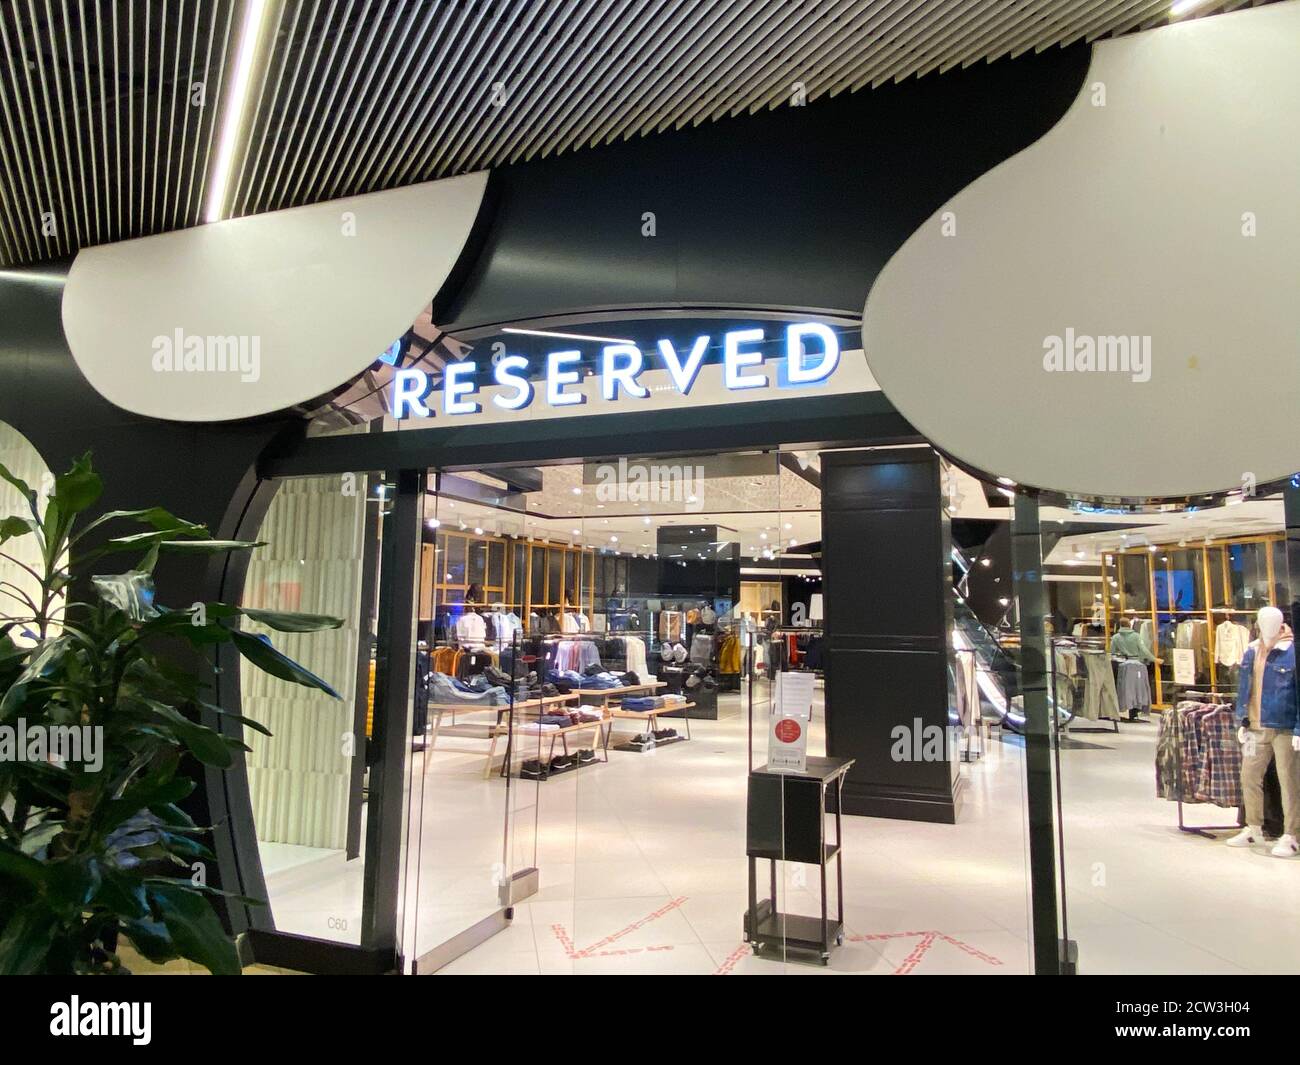 Monchengladbach, Germany - September 9. 2020: View on Reserved fashion  label company store front inside Minto shopping mall (focus on lettering  Stock Photo - Alamy